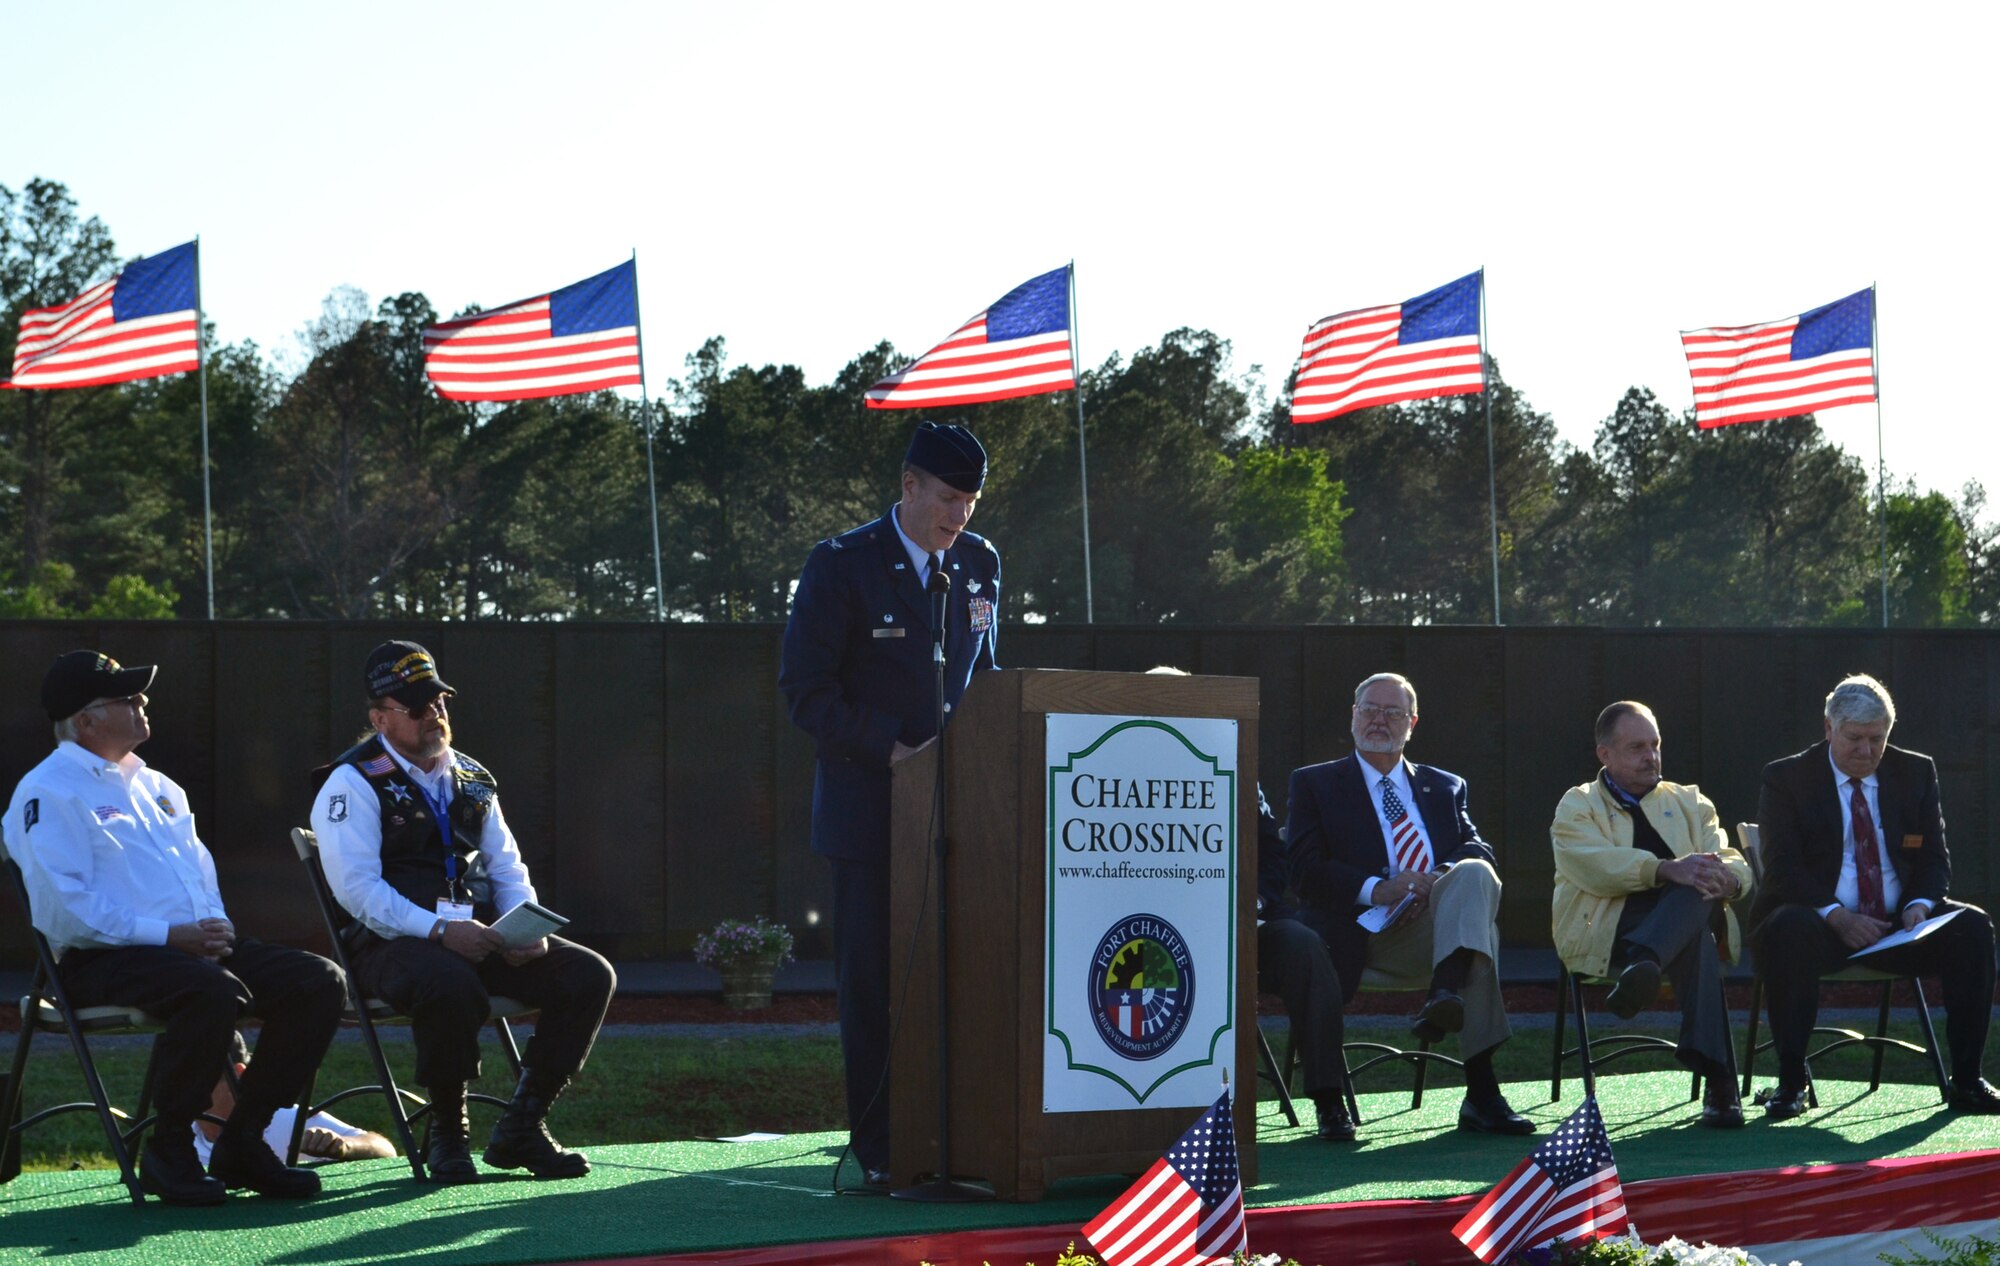 Col. Mark W. Anderson, 188th Fighter Wing commander, delivers a speech during the opening ceremony for the Memorial Vietnam Wall April 24. The Memorial Vietnam Wall is a portable 8-foot by 240-foot replica of the Vietnam Veterans Memorial in Washington, D.C. The three-quarter-scale faux granite replica is engraved with more than 58,000 names of veterans who died or were reporting missing during the Vietnam War. The memorial will be on display in Fort Smith near the intersection of Zero Street and Veterans Boulevard. (Courtesy photo)

